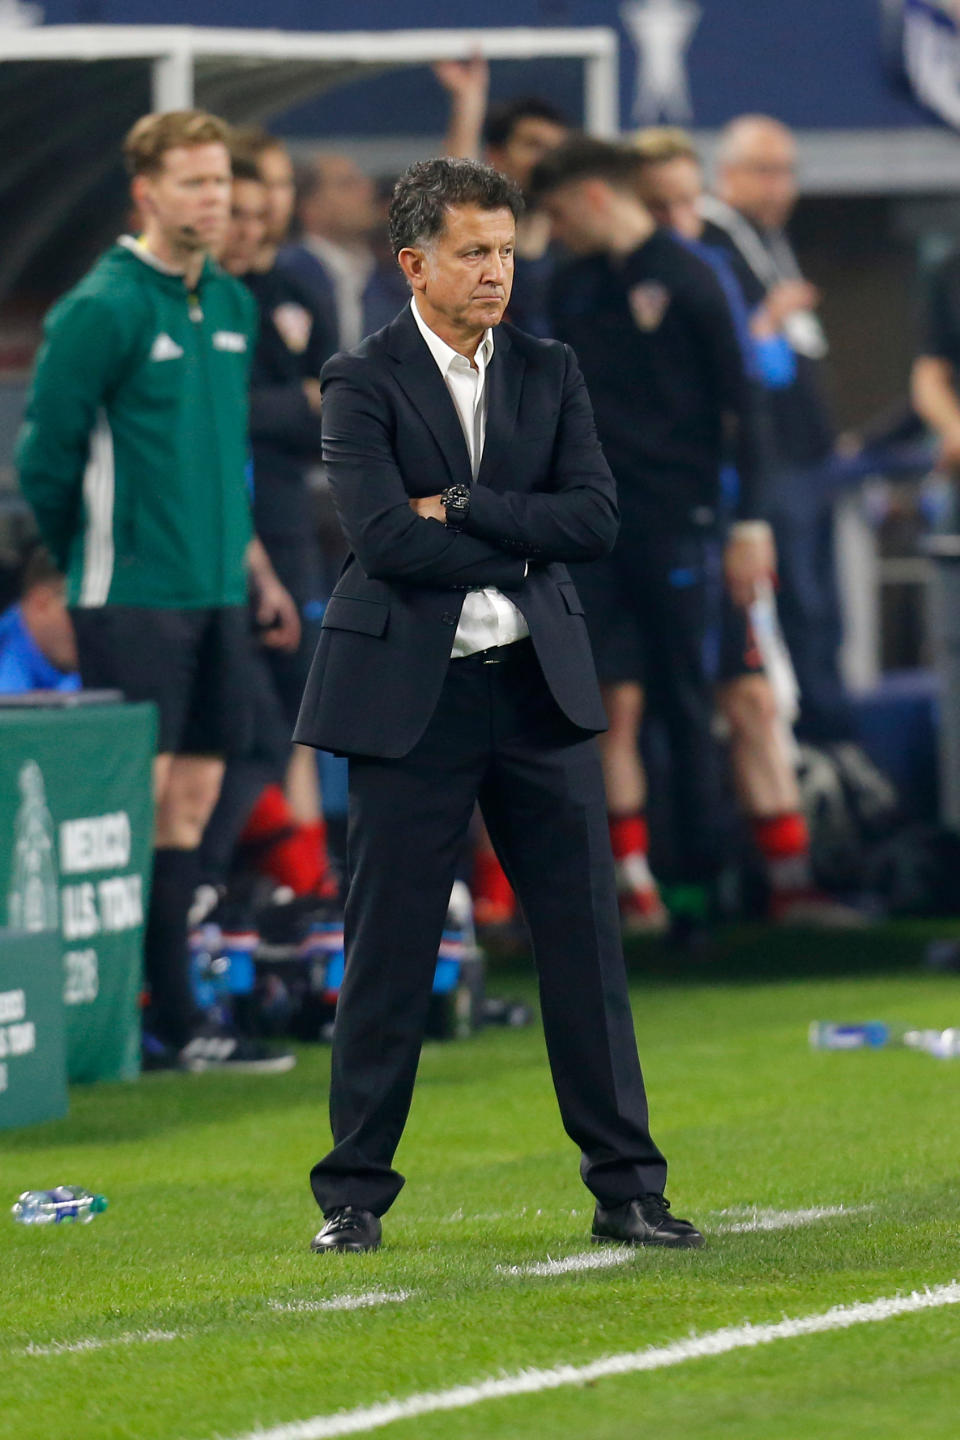 In this image taken on Tuesday, March 27, 2018 Mexico head coach Juan Carlos Osorio watches play during the second half of an international friendly soccer match against Croatia in Arlington, Texas, Tuesday, March 27, 2018. (AP Photo/Roger Steinman)